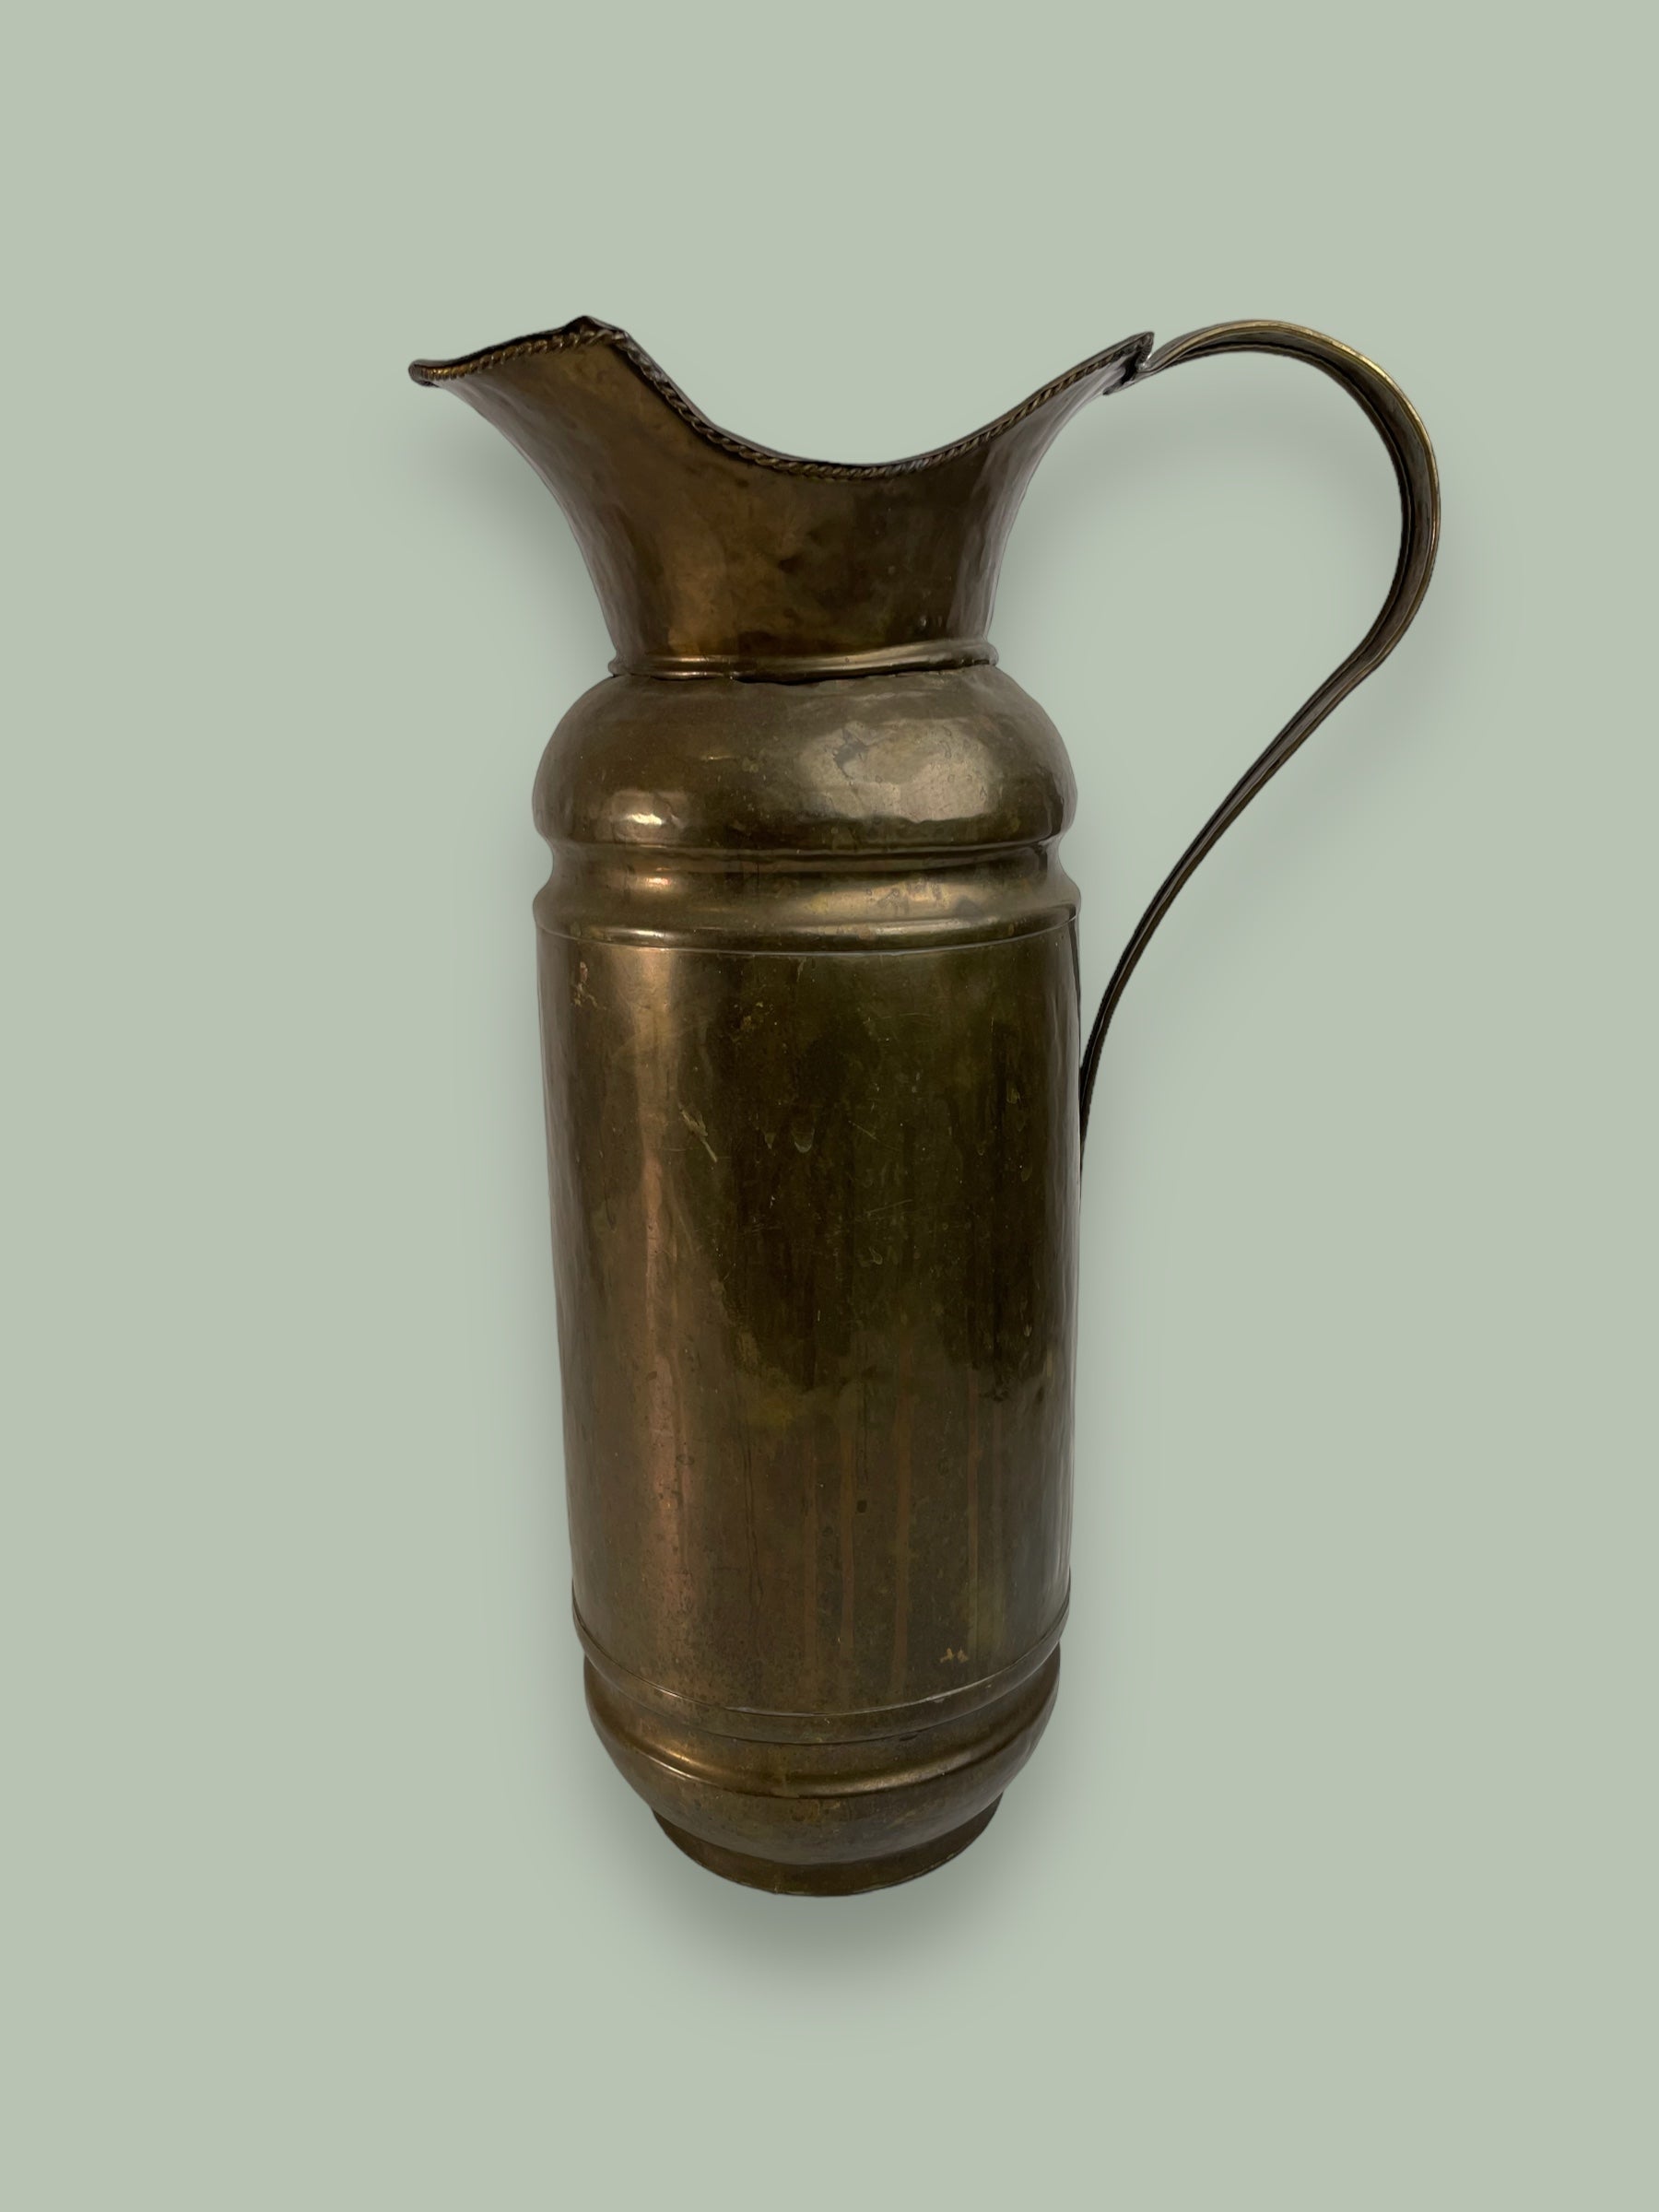 Vintage Large Jug Crafted from Copper Alloy